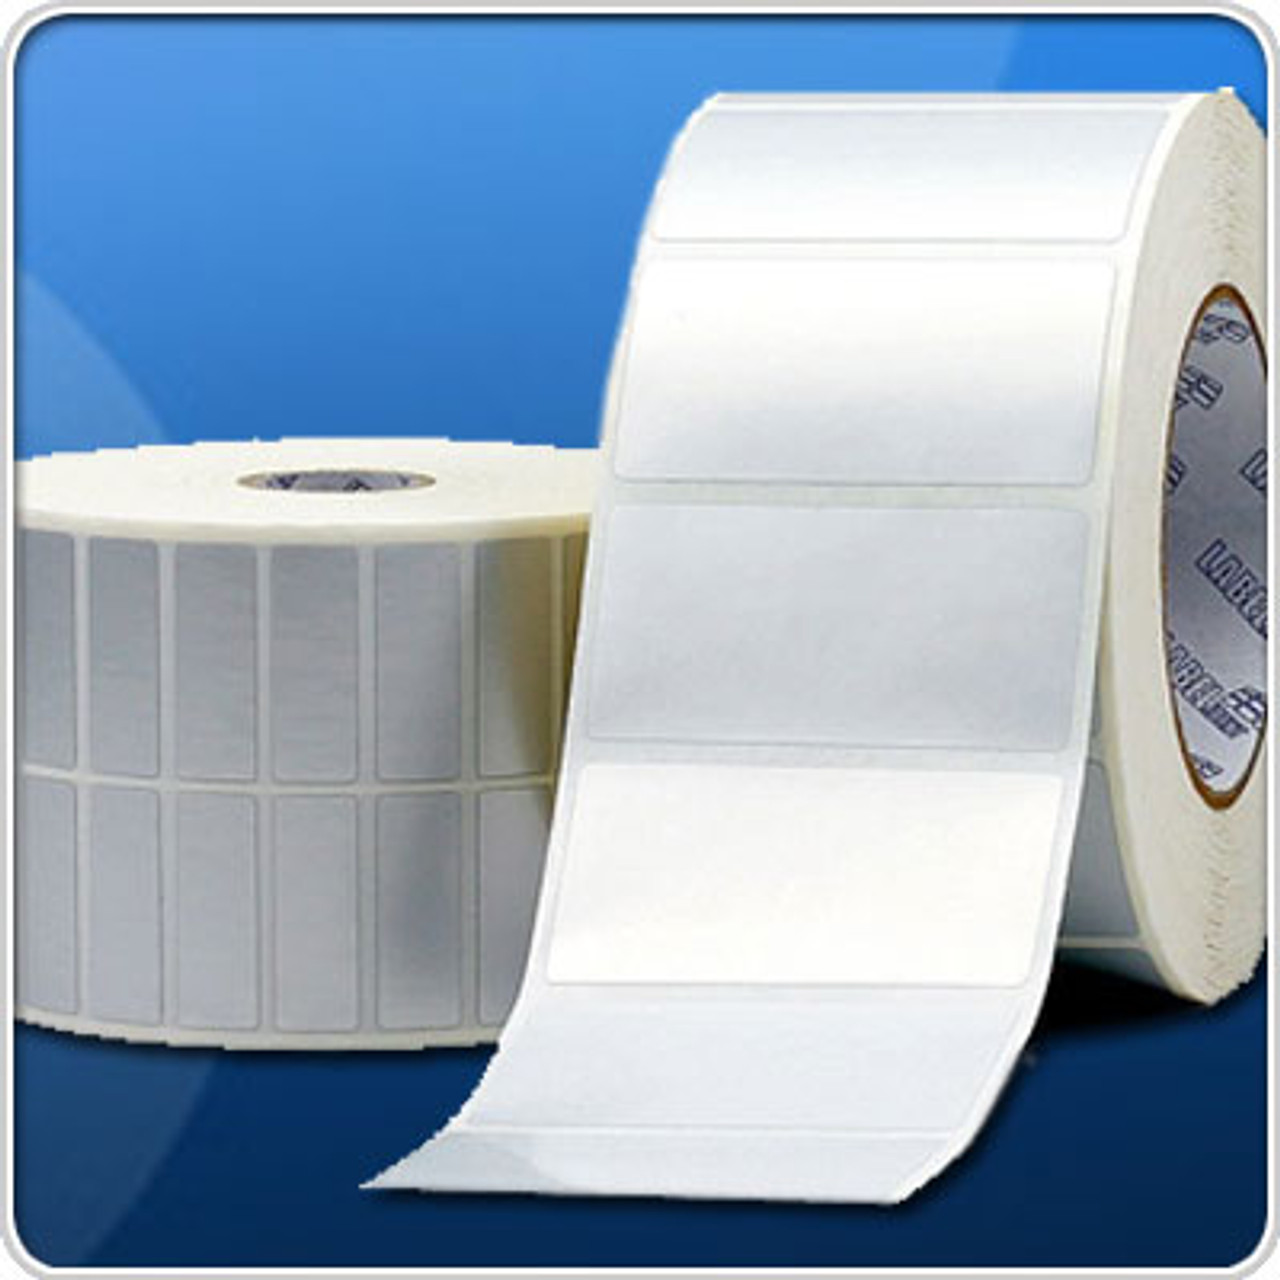 Adhesive label, thermal transfer, polyester, white, 3-1/4 x 1/2